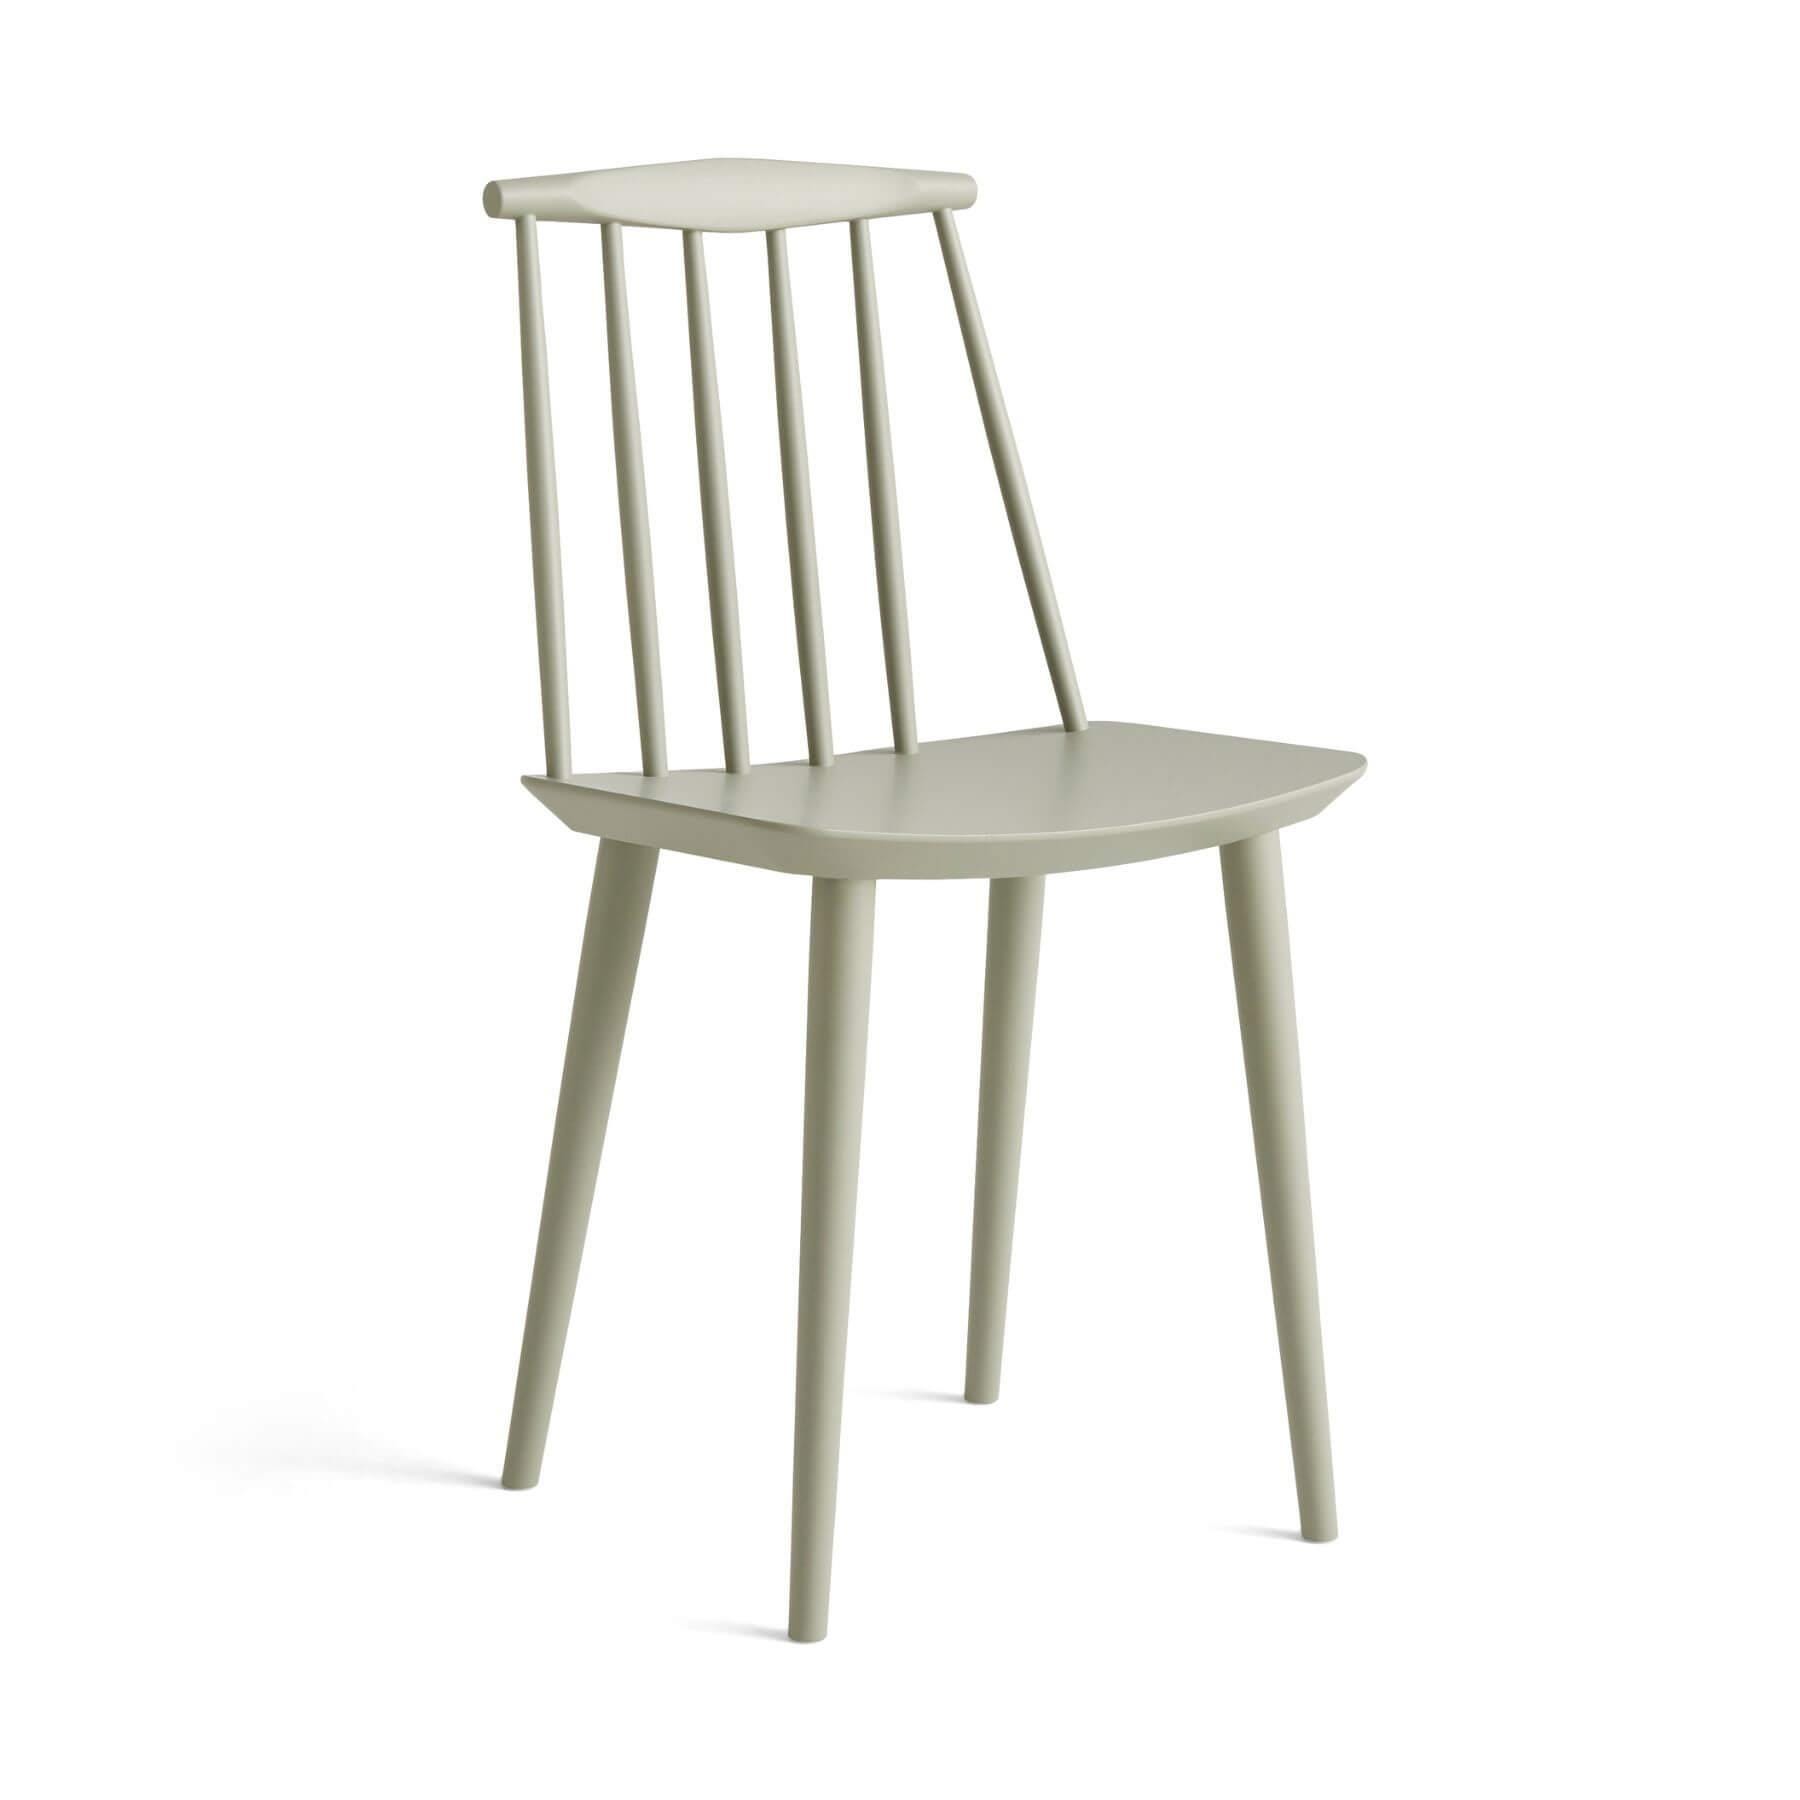 Hay Jseries 77 Dining Chair Beech Lacquered Sage Felt Gliders Green Designer Furniture From Holloways Of Ludlow